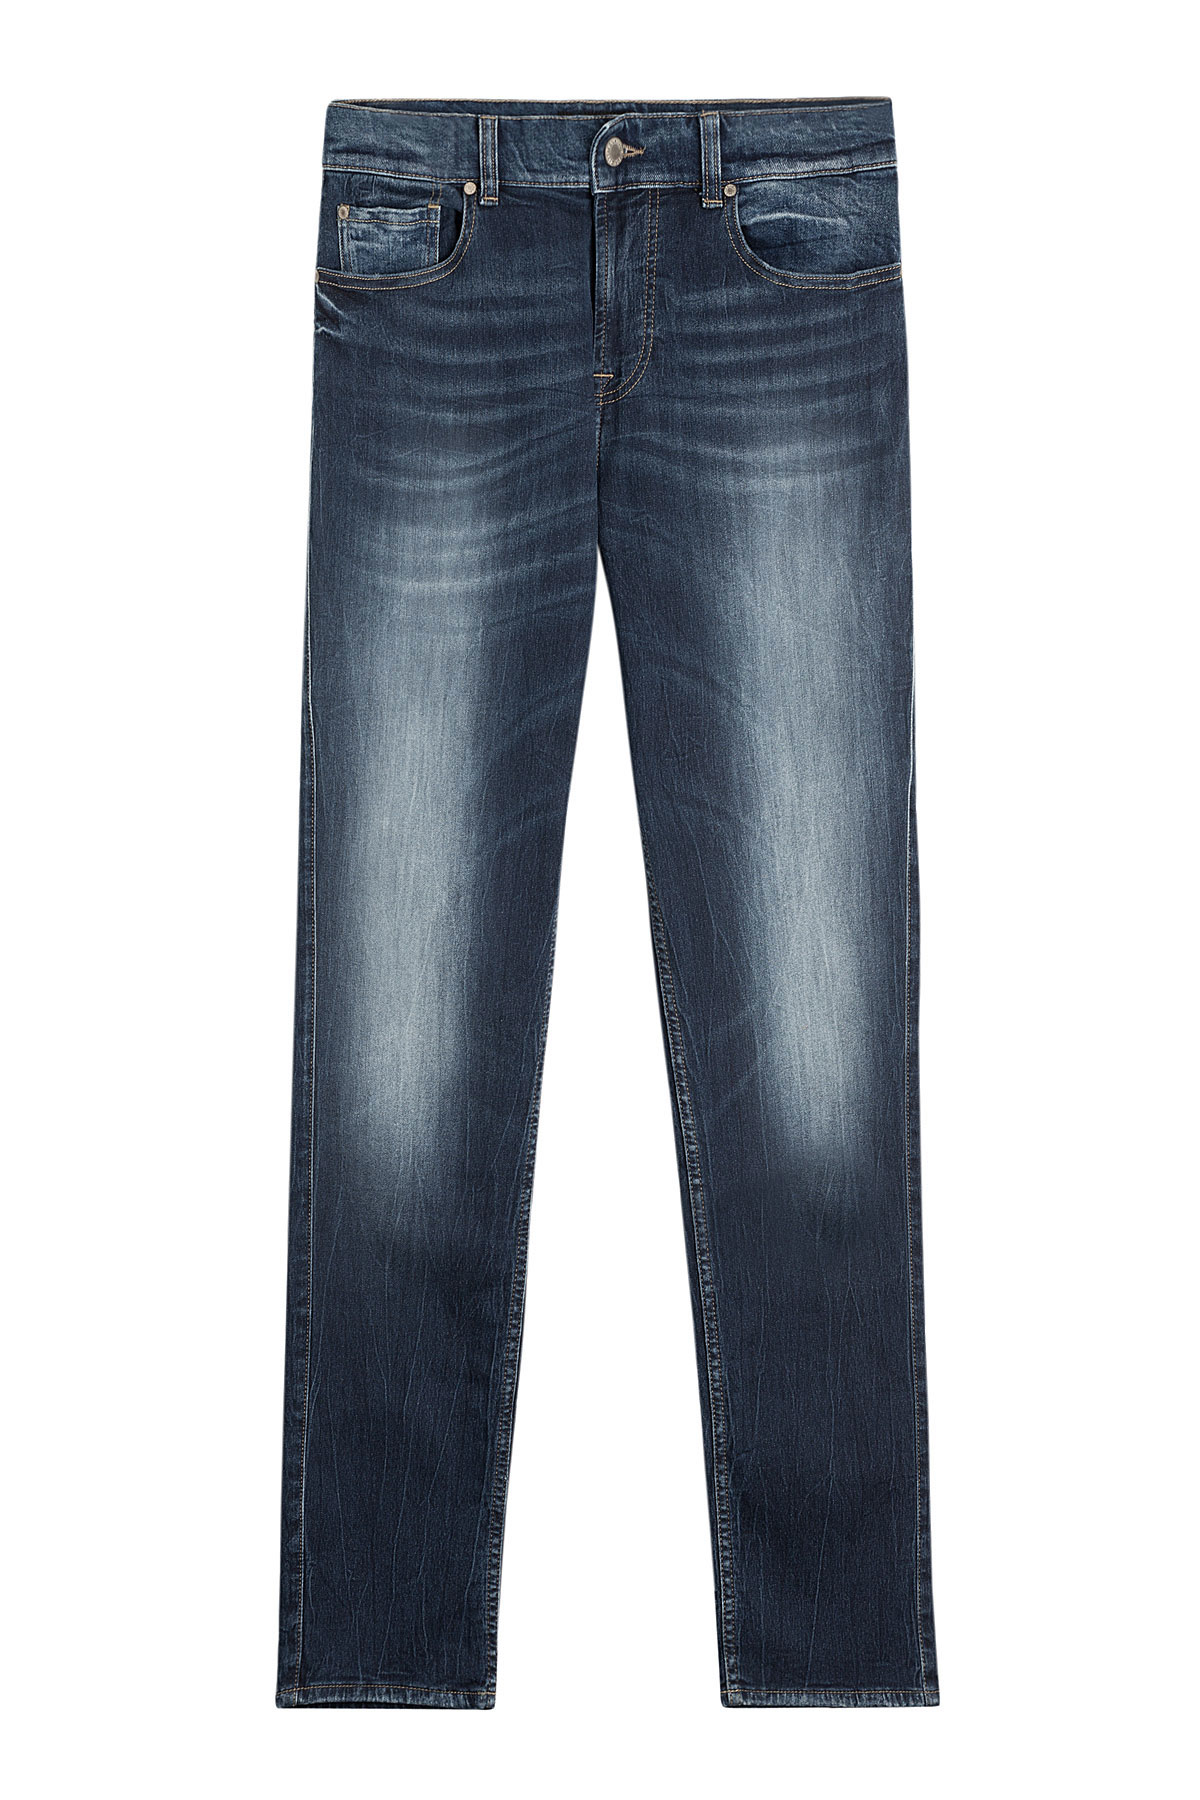 7 for all mankind Stretch Cotton Skinny Jeans in Blue for Men | Lyst